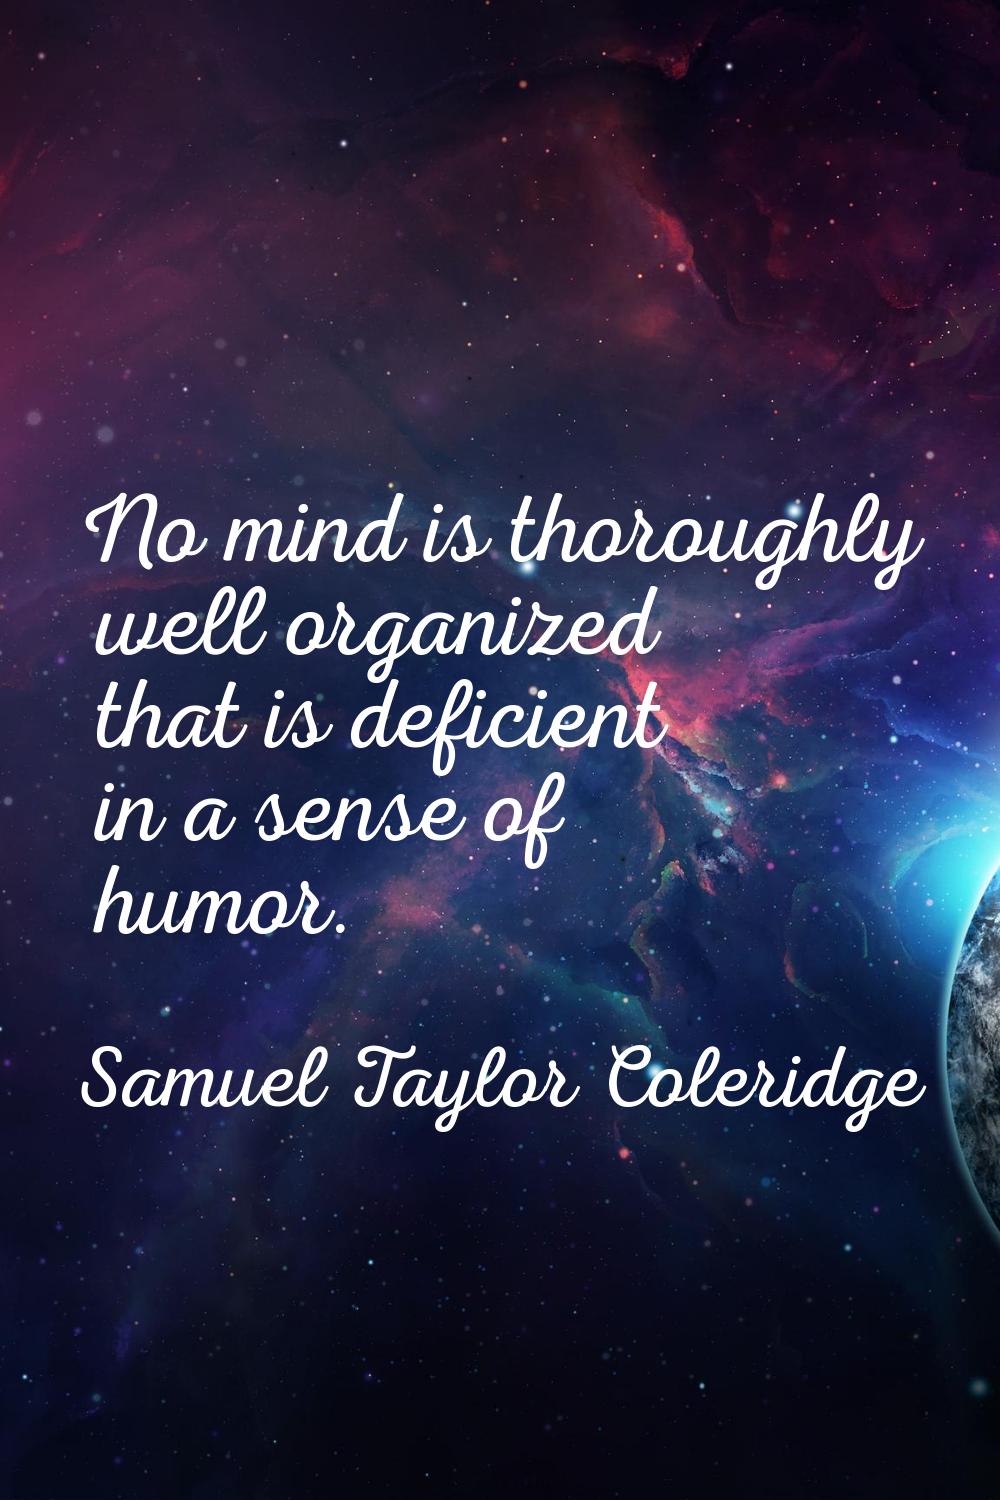 No mind is thoroughly well organized that is deficient in a sense of humor.